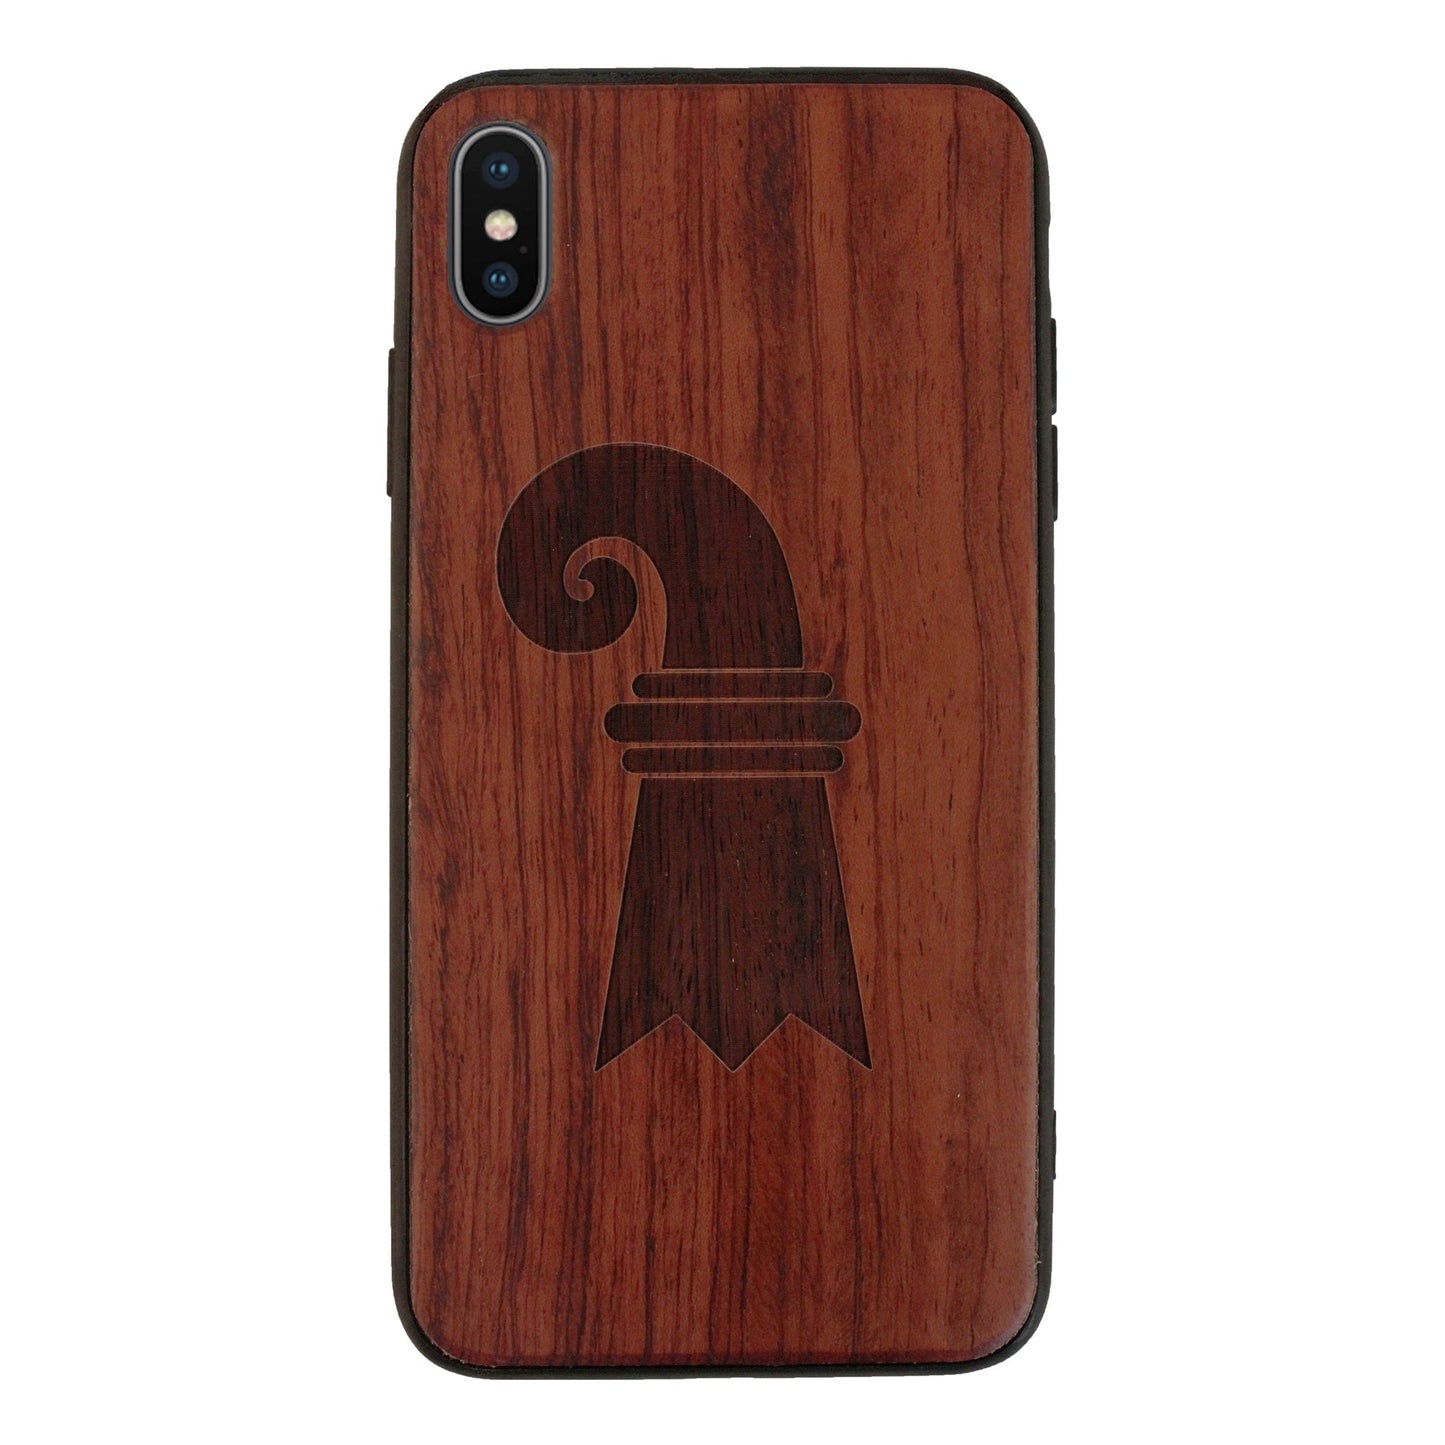 Baslerstab Eden rosewood case for iPhone XS Max